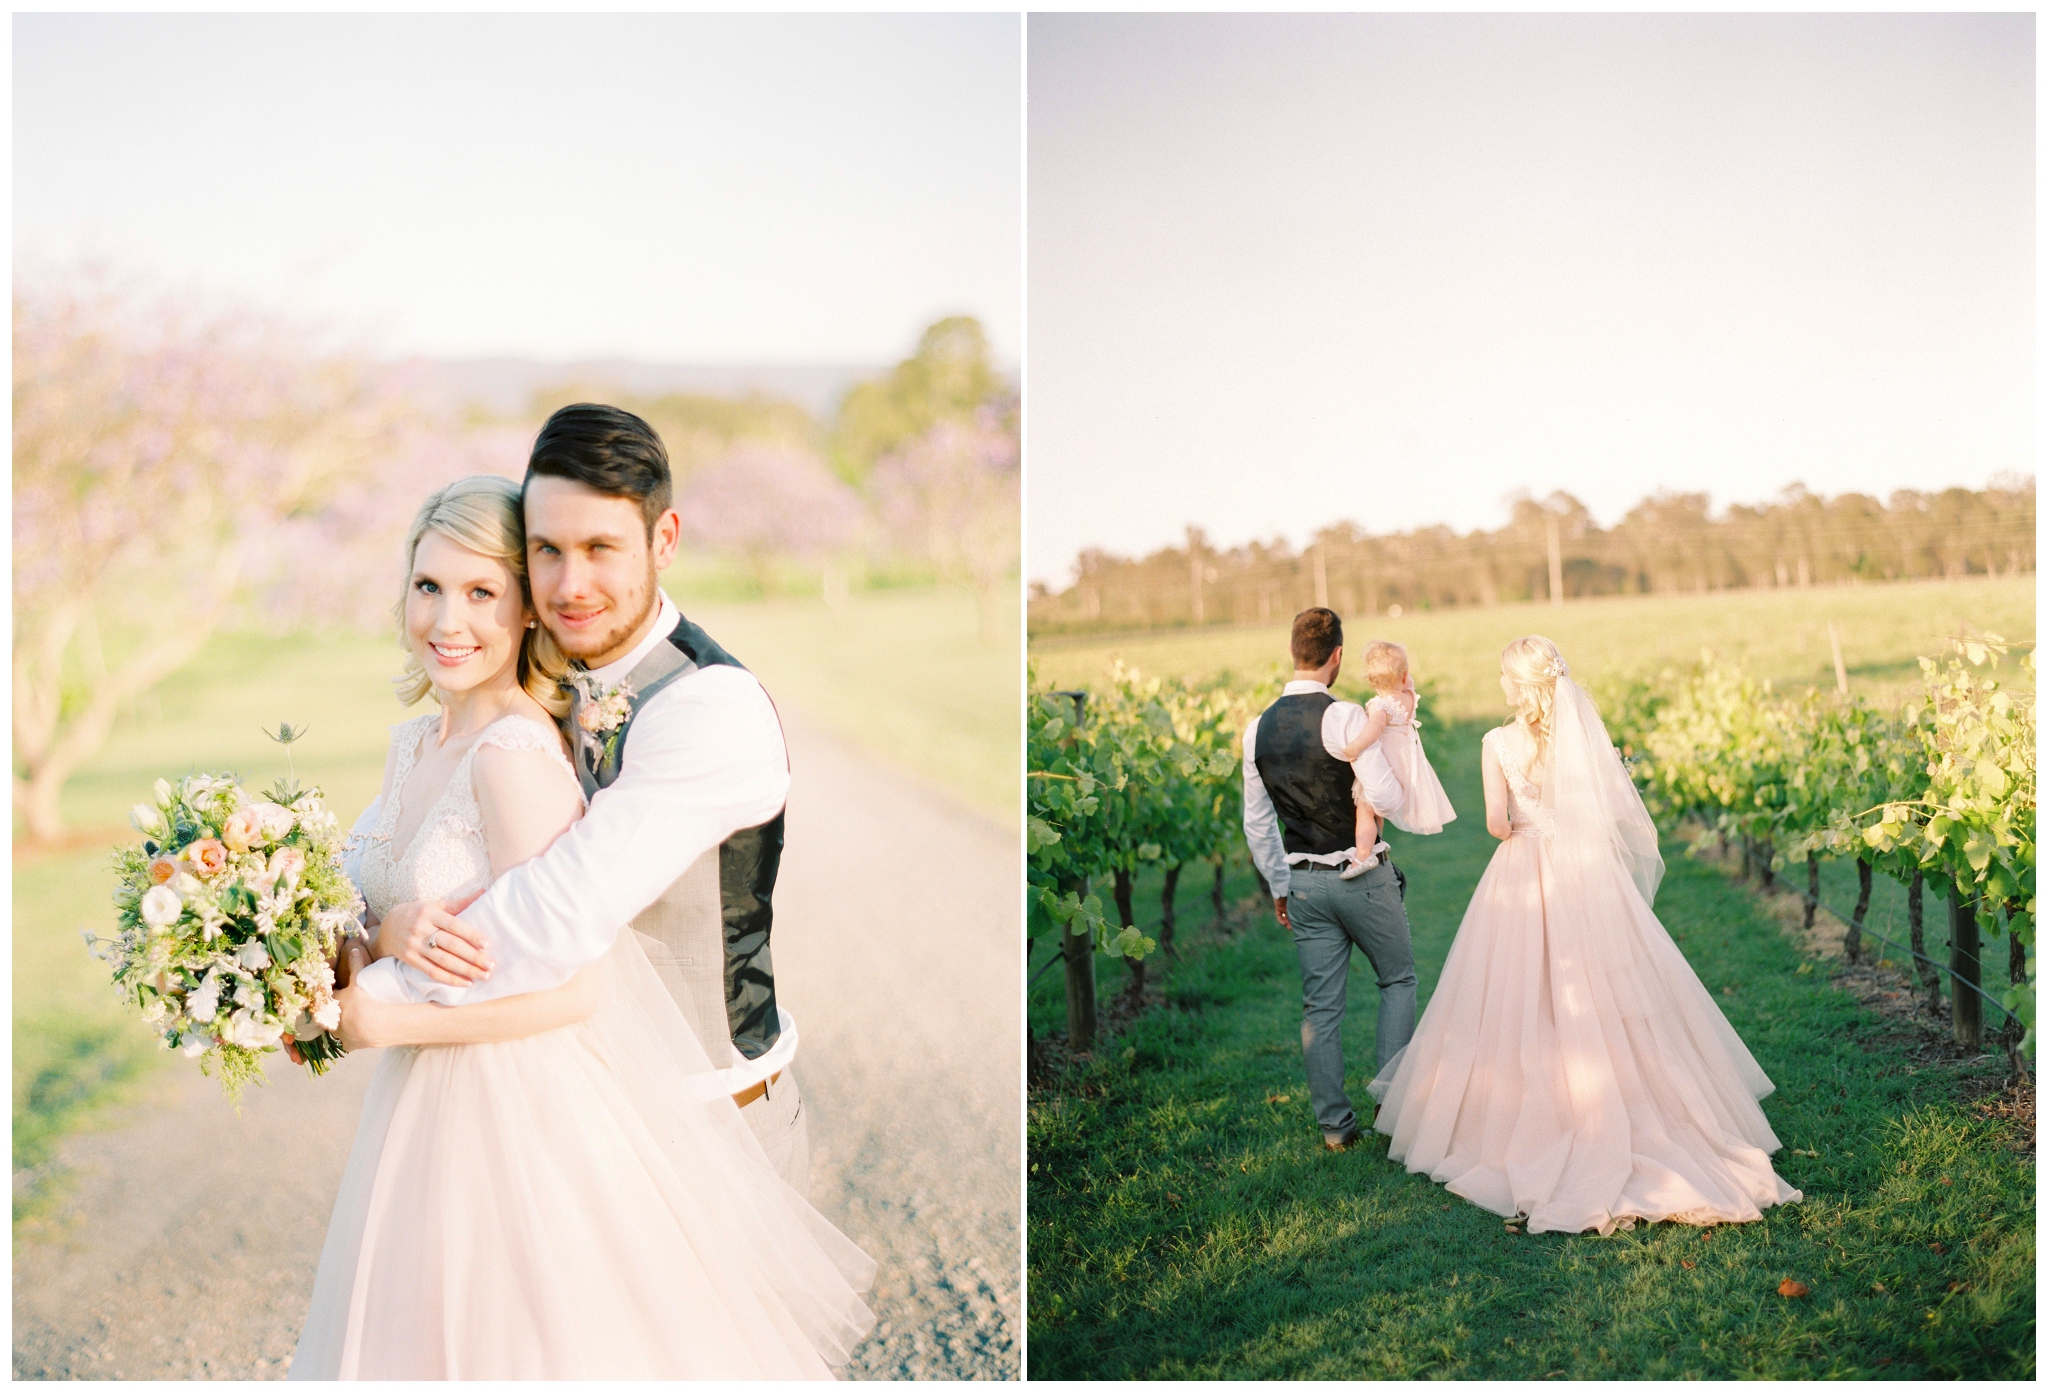 Tegan and Alex Wedding at Albert River Wines by Casey Jane Photography 57